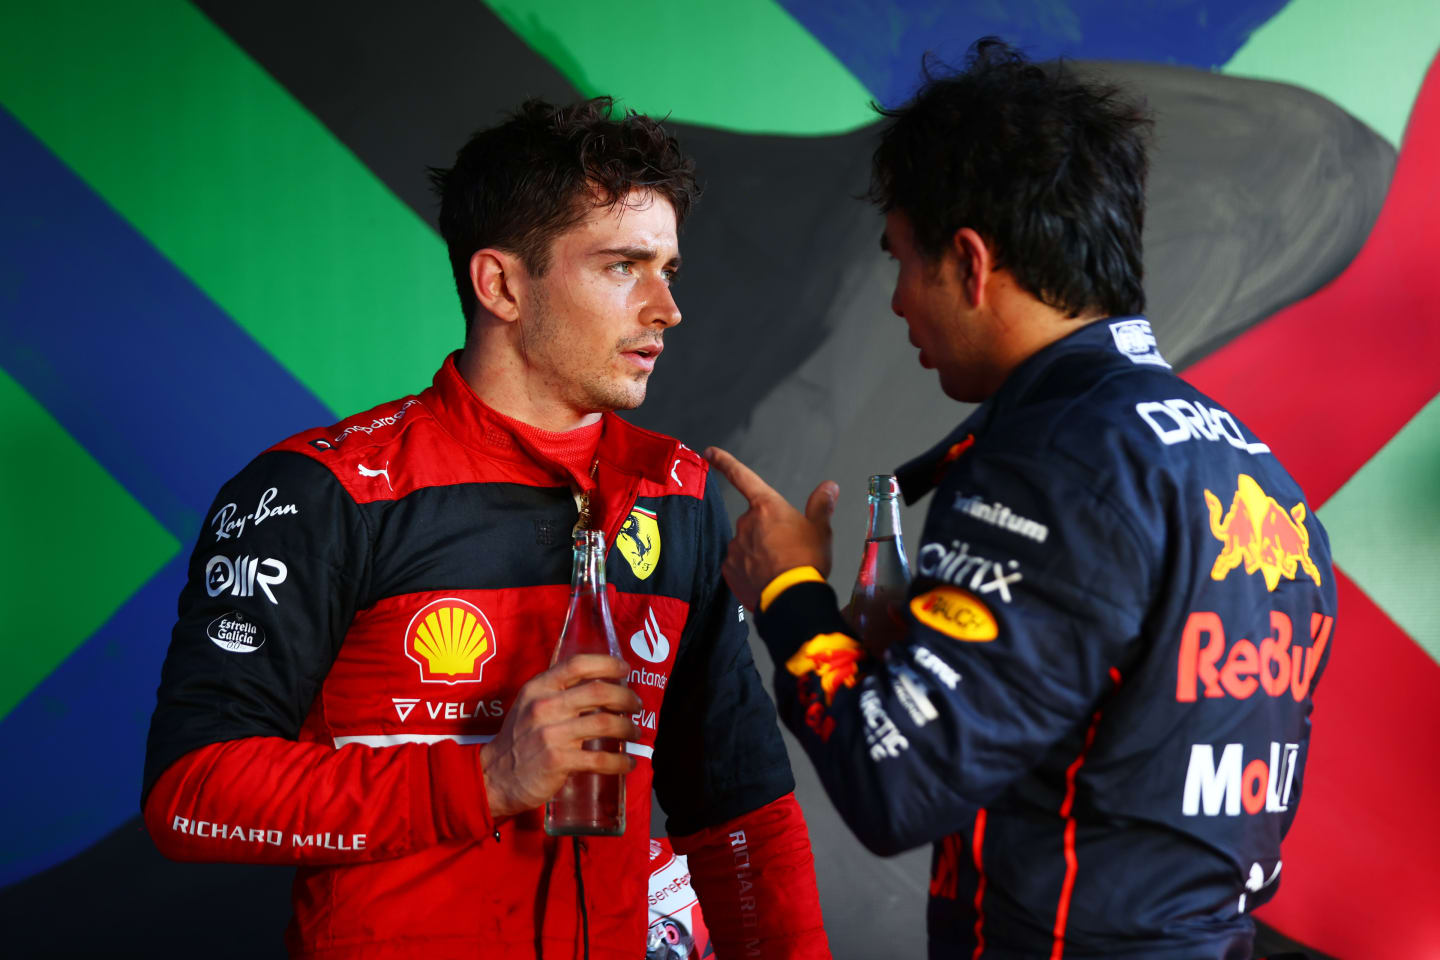 MELBOURNE, AUSTRALIA - APRIL 10: Race winner Charles Leclerc of Monaco and Ferrari and Second placed Sergio Perez of Mexico and Oracle Red Bull Racing talk in parc ferme during the F1 Grand Prix of Australia at Melbourne Grand Prix Circuit on April 10, 2022 in Melbourne, Australia. (Photo by Dan Istitene - Formula 1/Formula 1 via Getty Images)